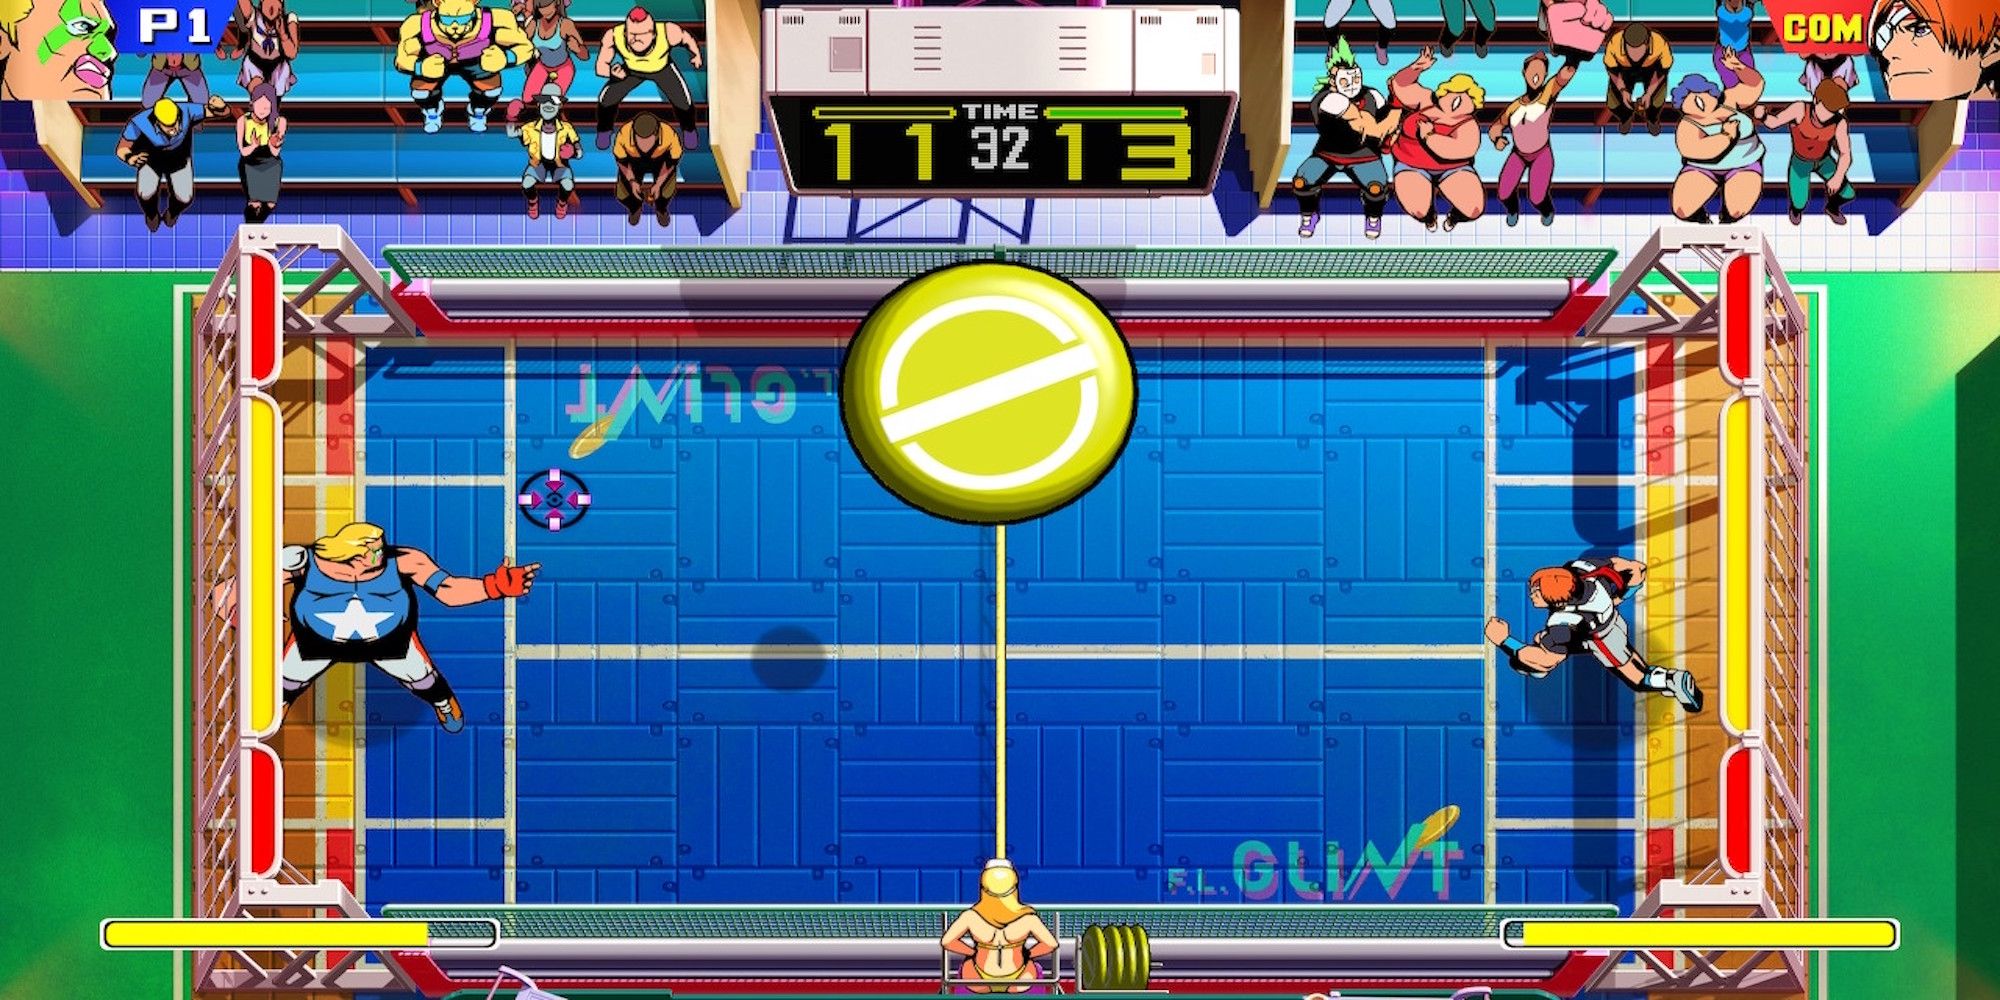 Playing a match in Windjammers 2